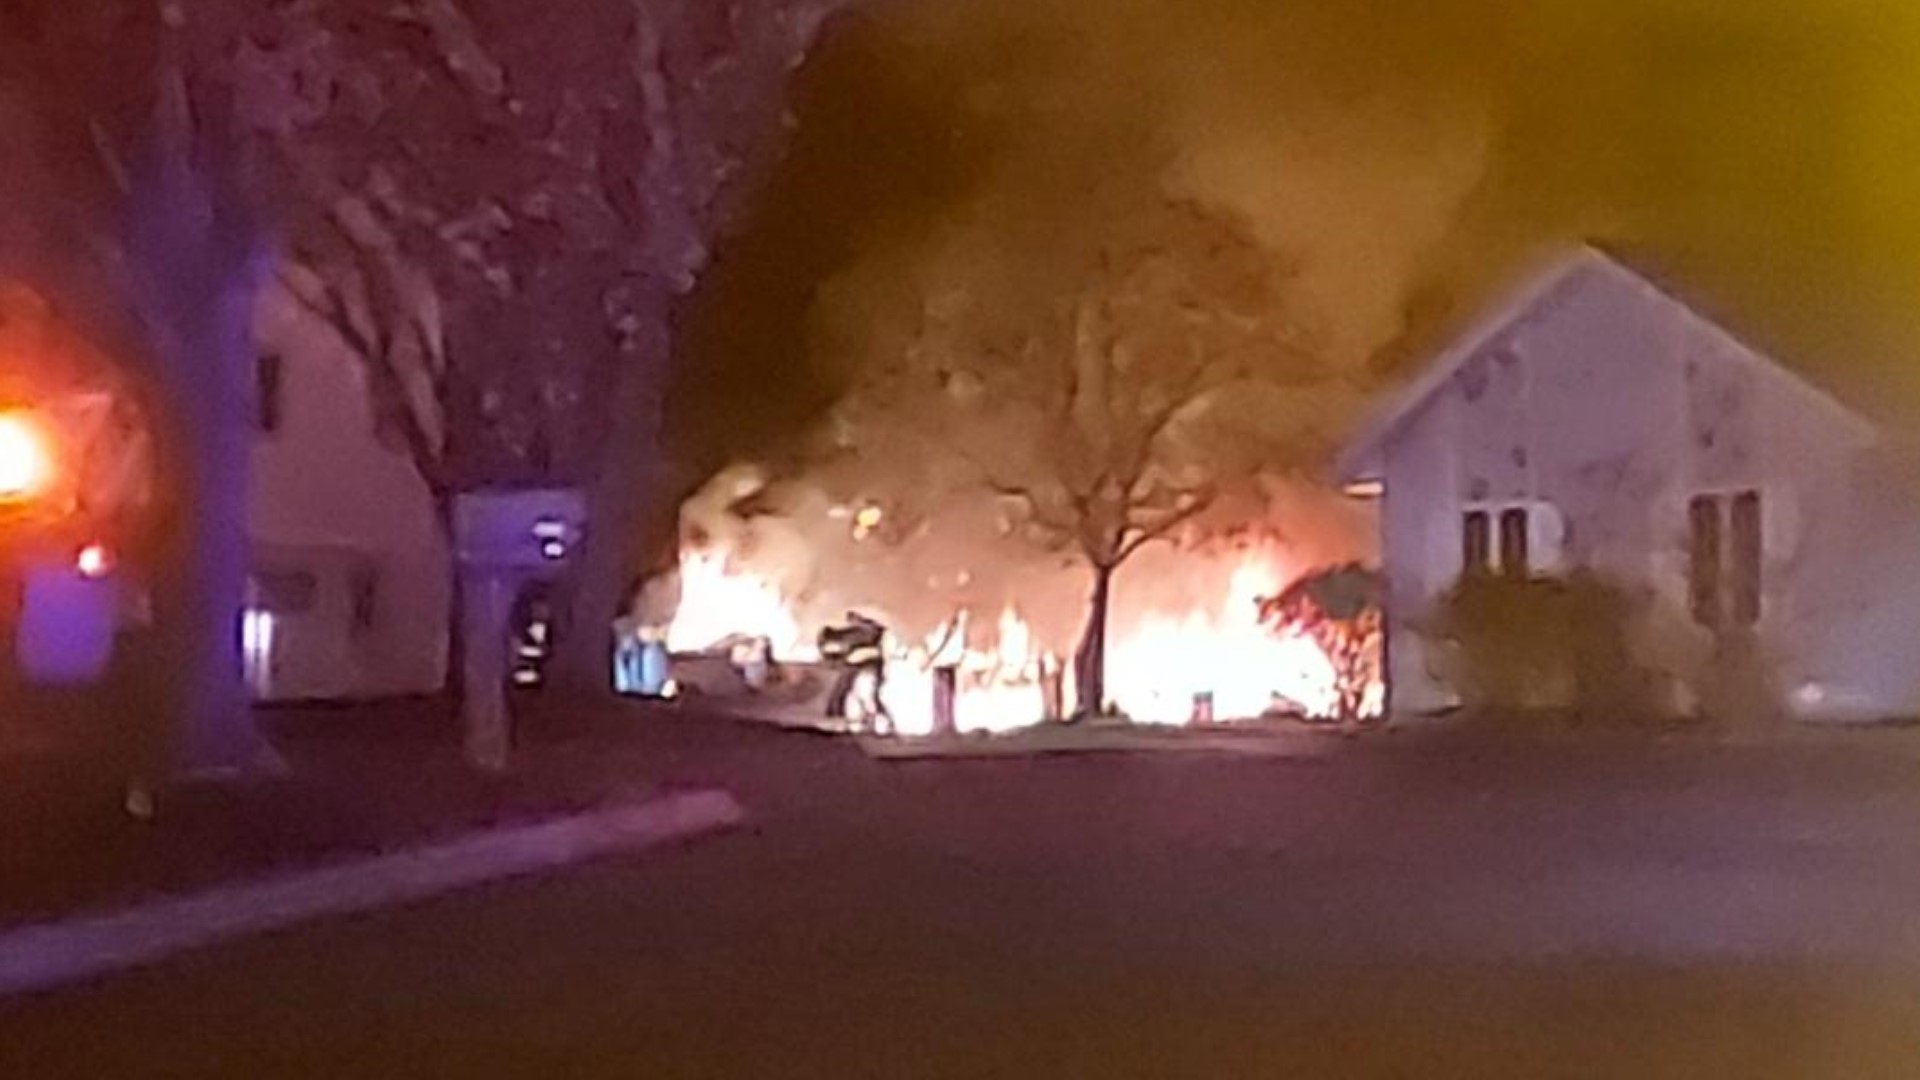 The fire started around 2:40 a.m. in a camper parked in the driveway.